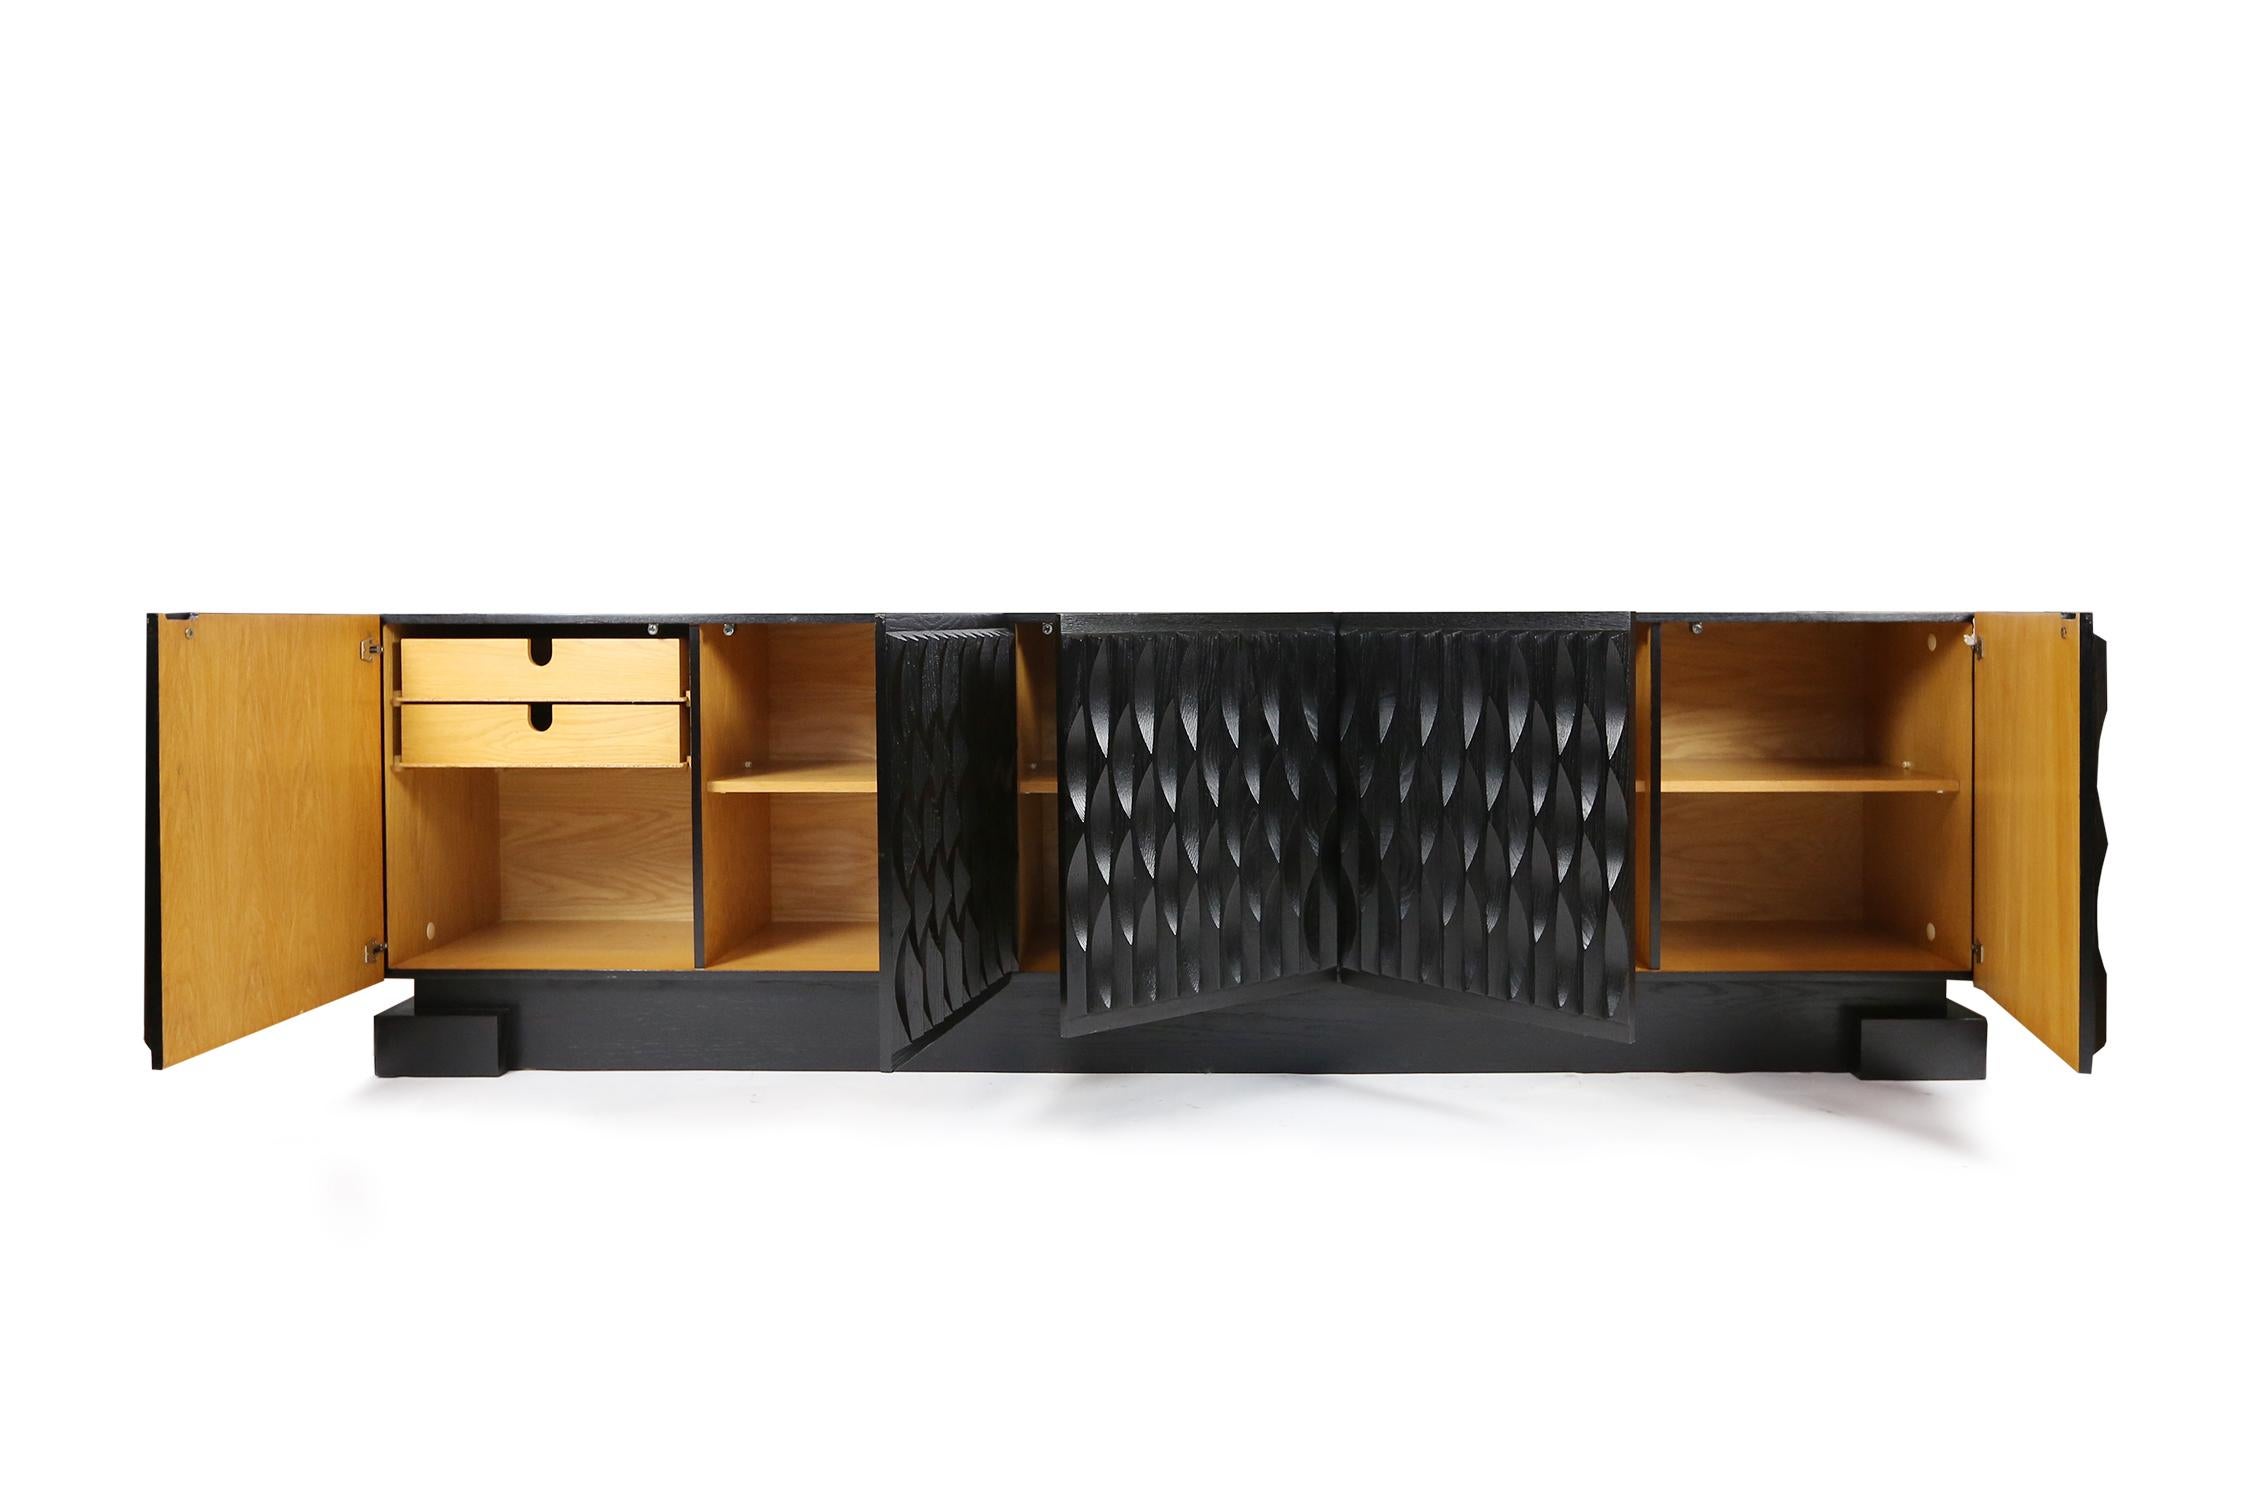 Ebonized oak Brutalist sideboard with graphic wave detail on front five doors. The interior has one set drawers with other openings having shelves.
Beautiful refinished condition.